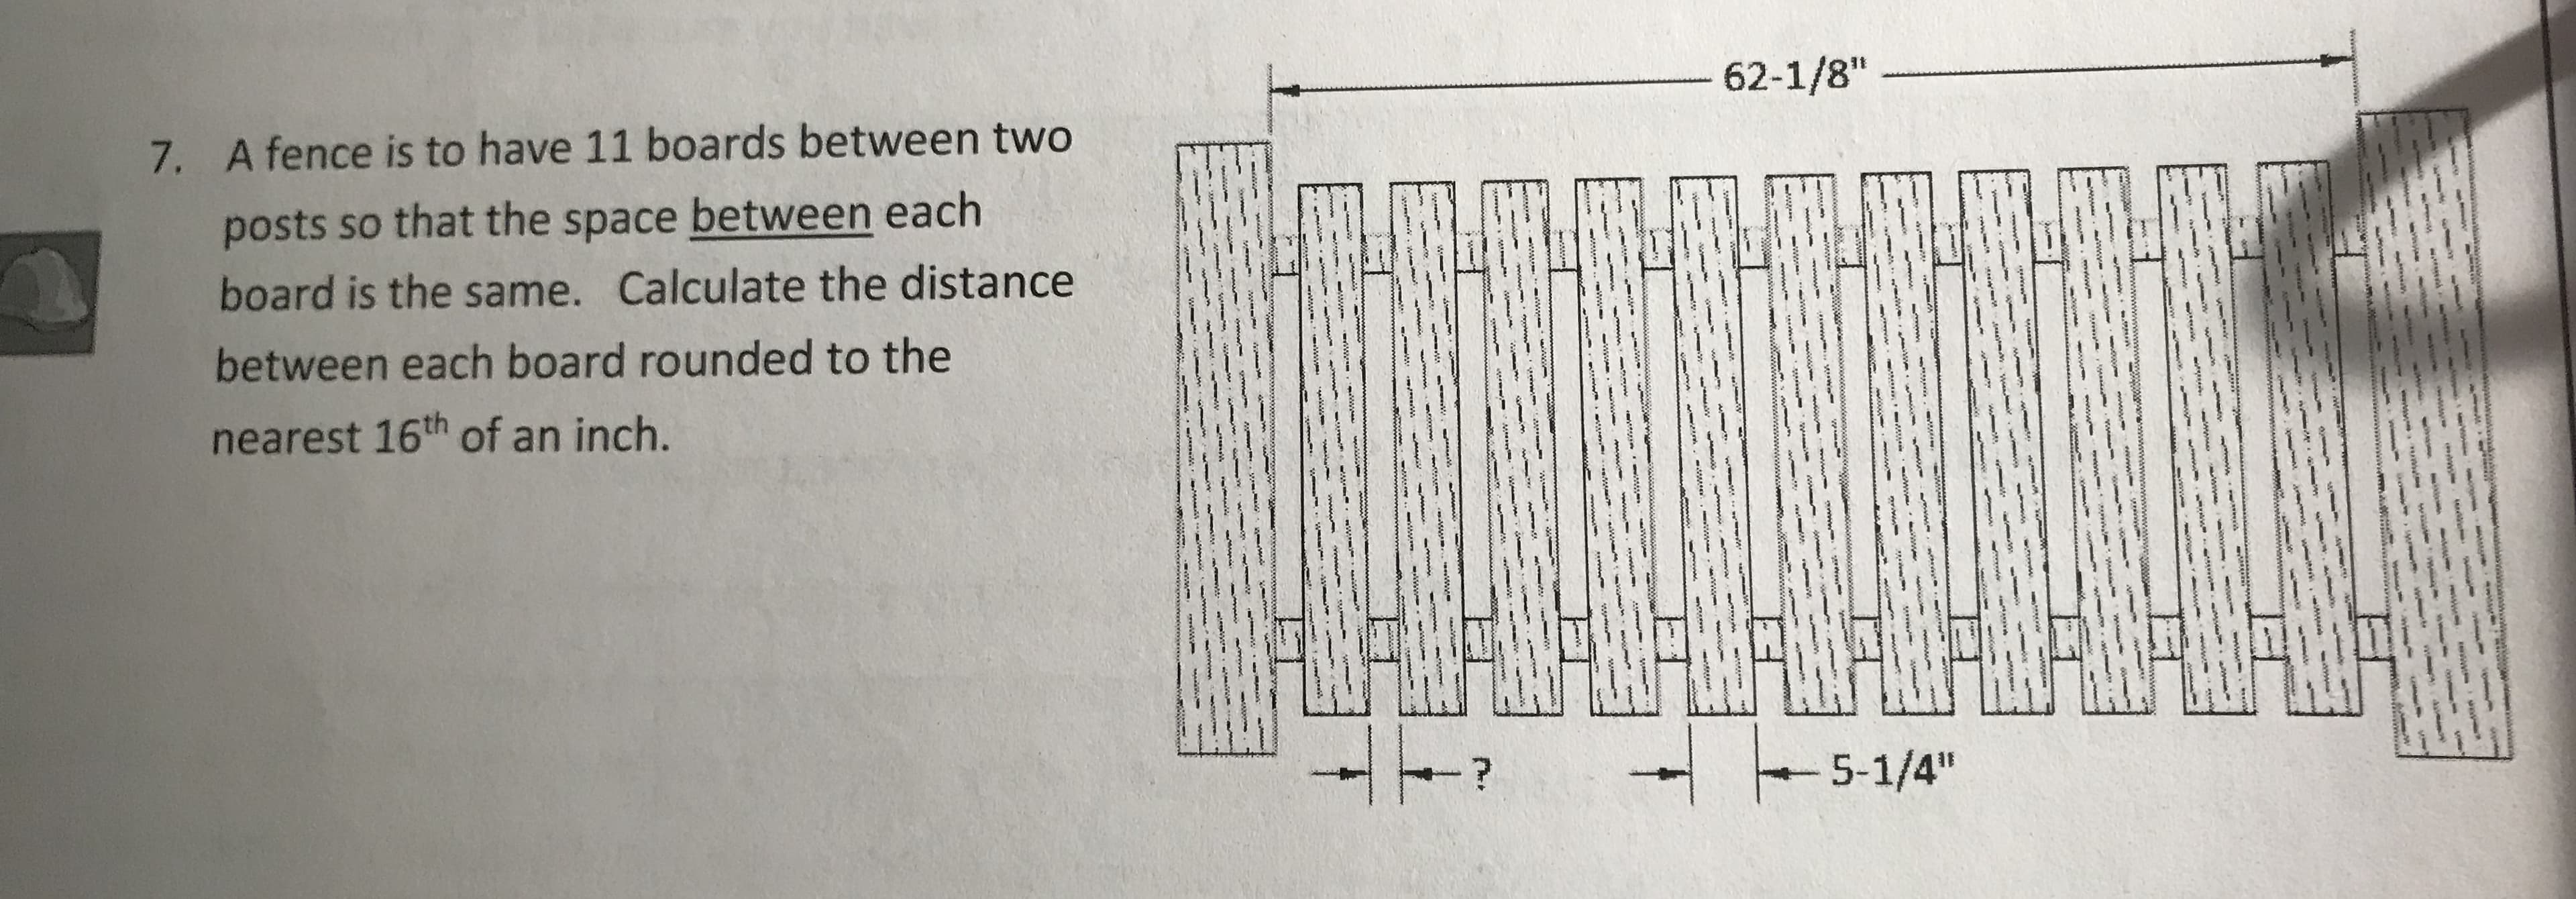 62-1/8"
7.
A fence is to have 11 boards between two
posts so that the space between each
board is the same. Calculate the distance
between each board rounded to the
nearest 16th of an inch.
5-1/4"
